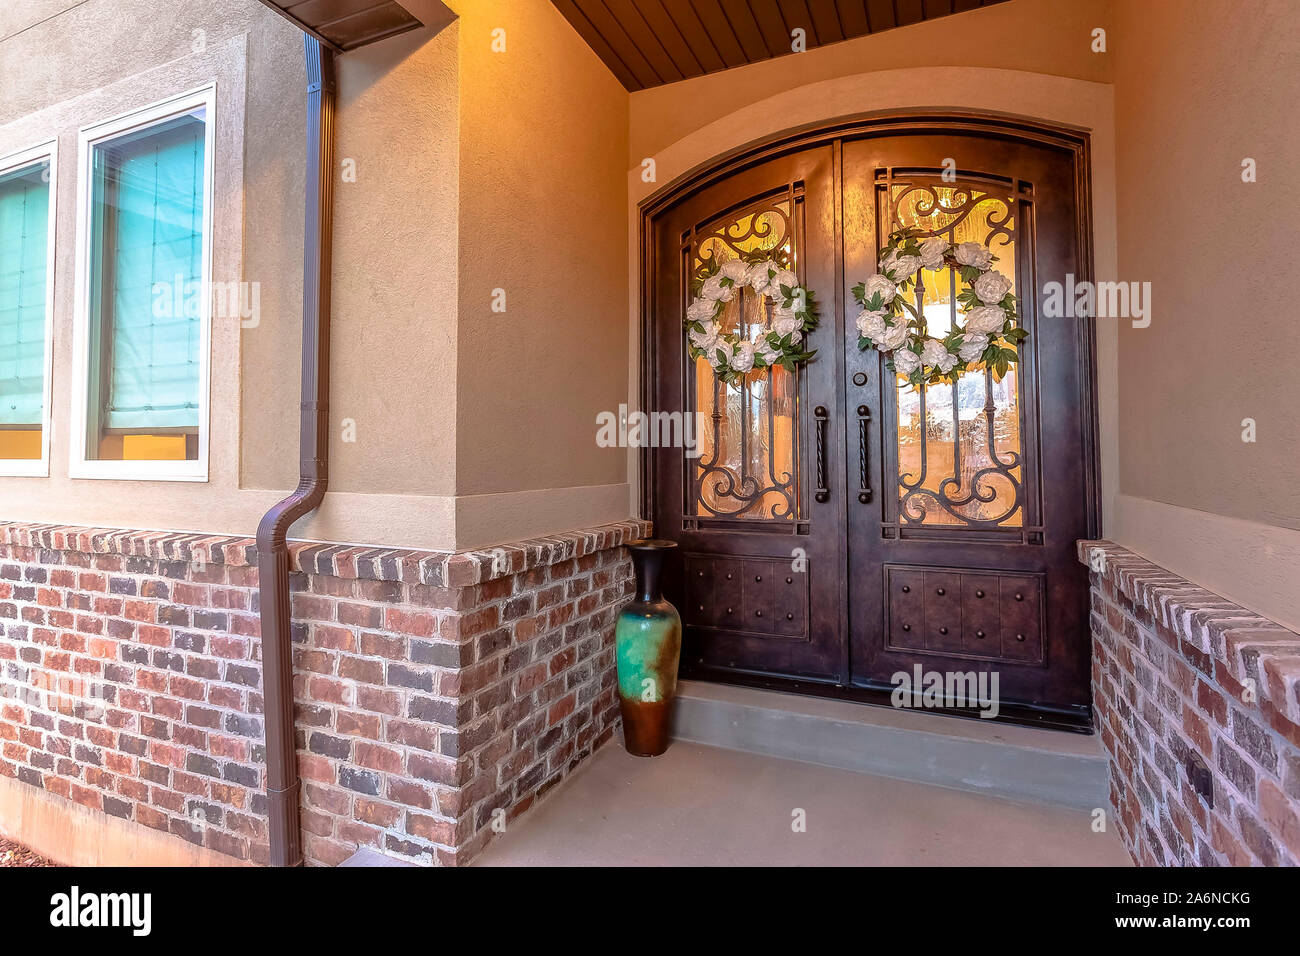 Arched Double Door Entrance With Reflections Outside Stock